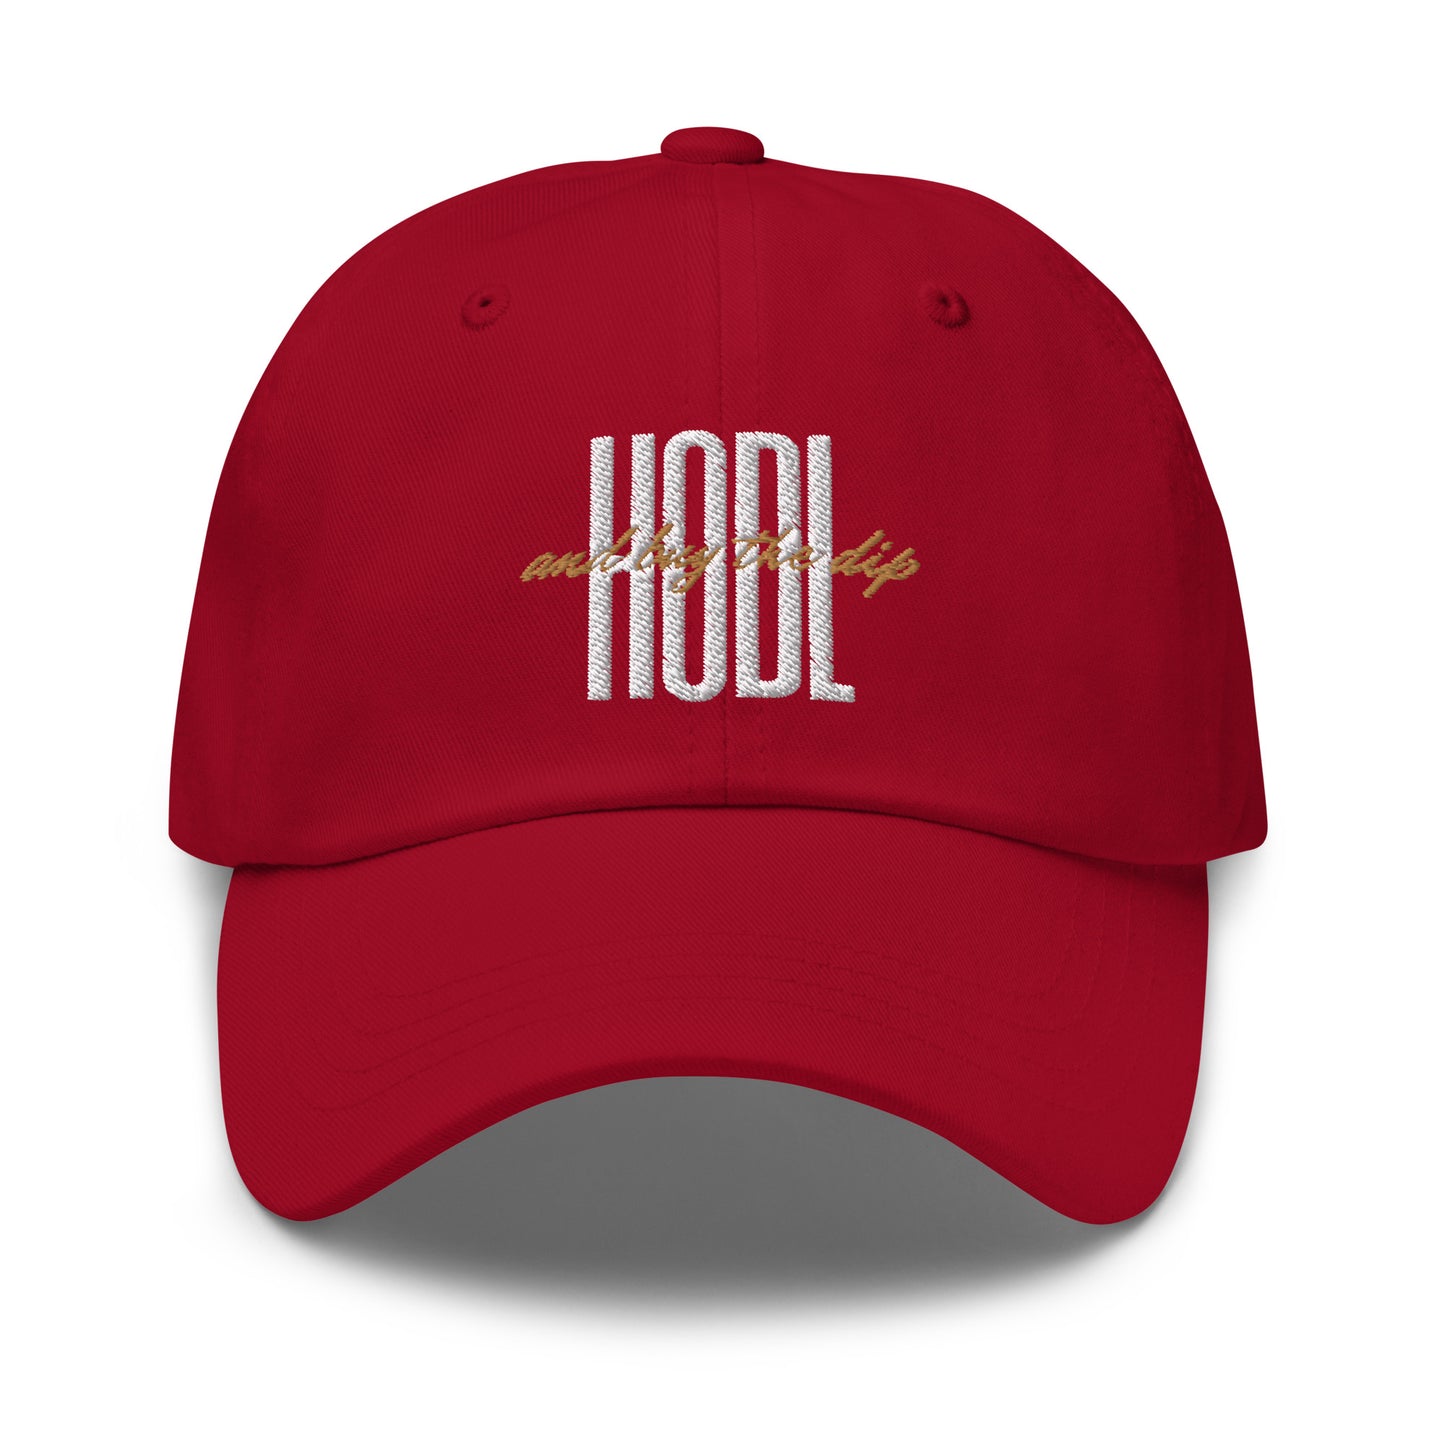 HODL AND BUY THE DIP Comfort Basecap